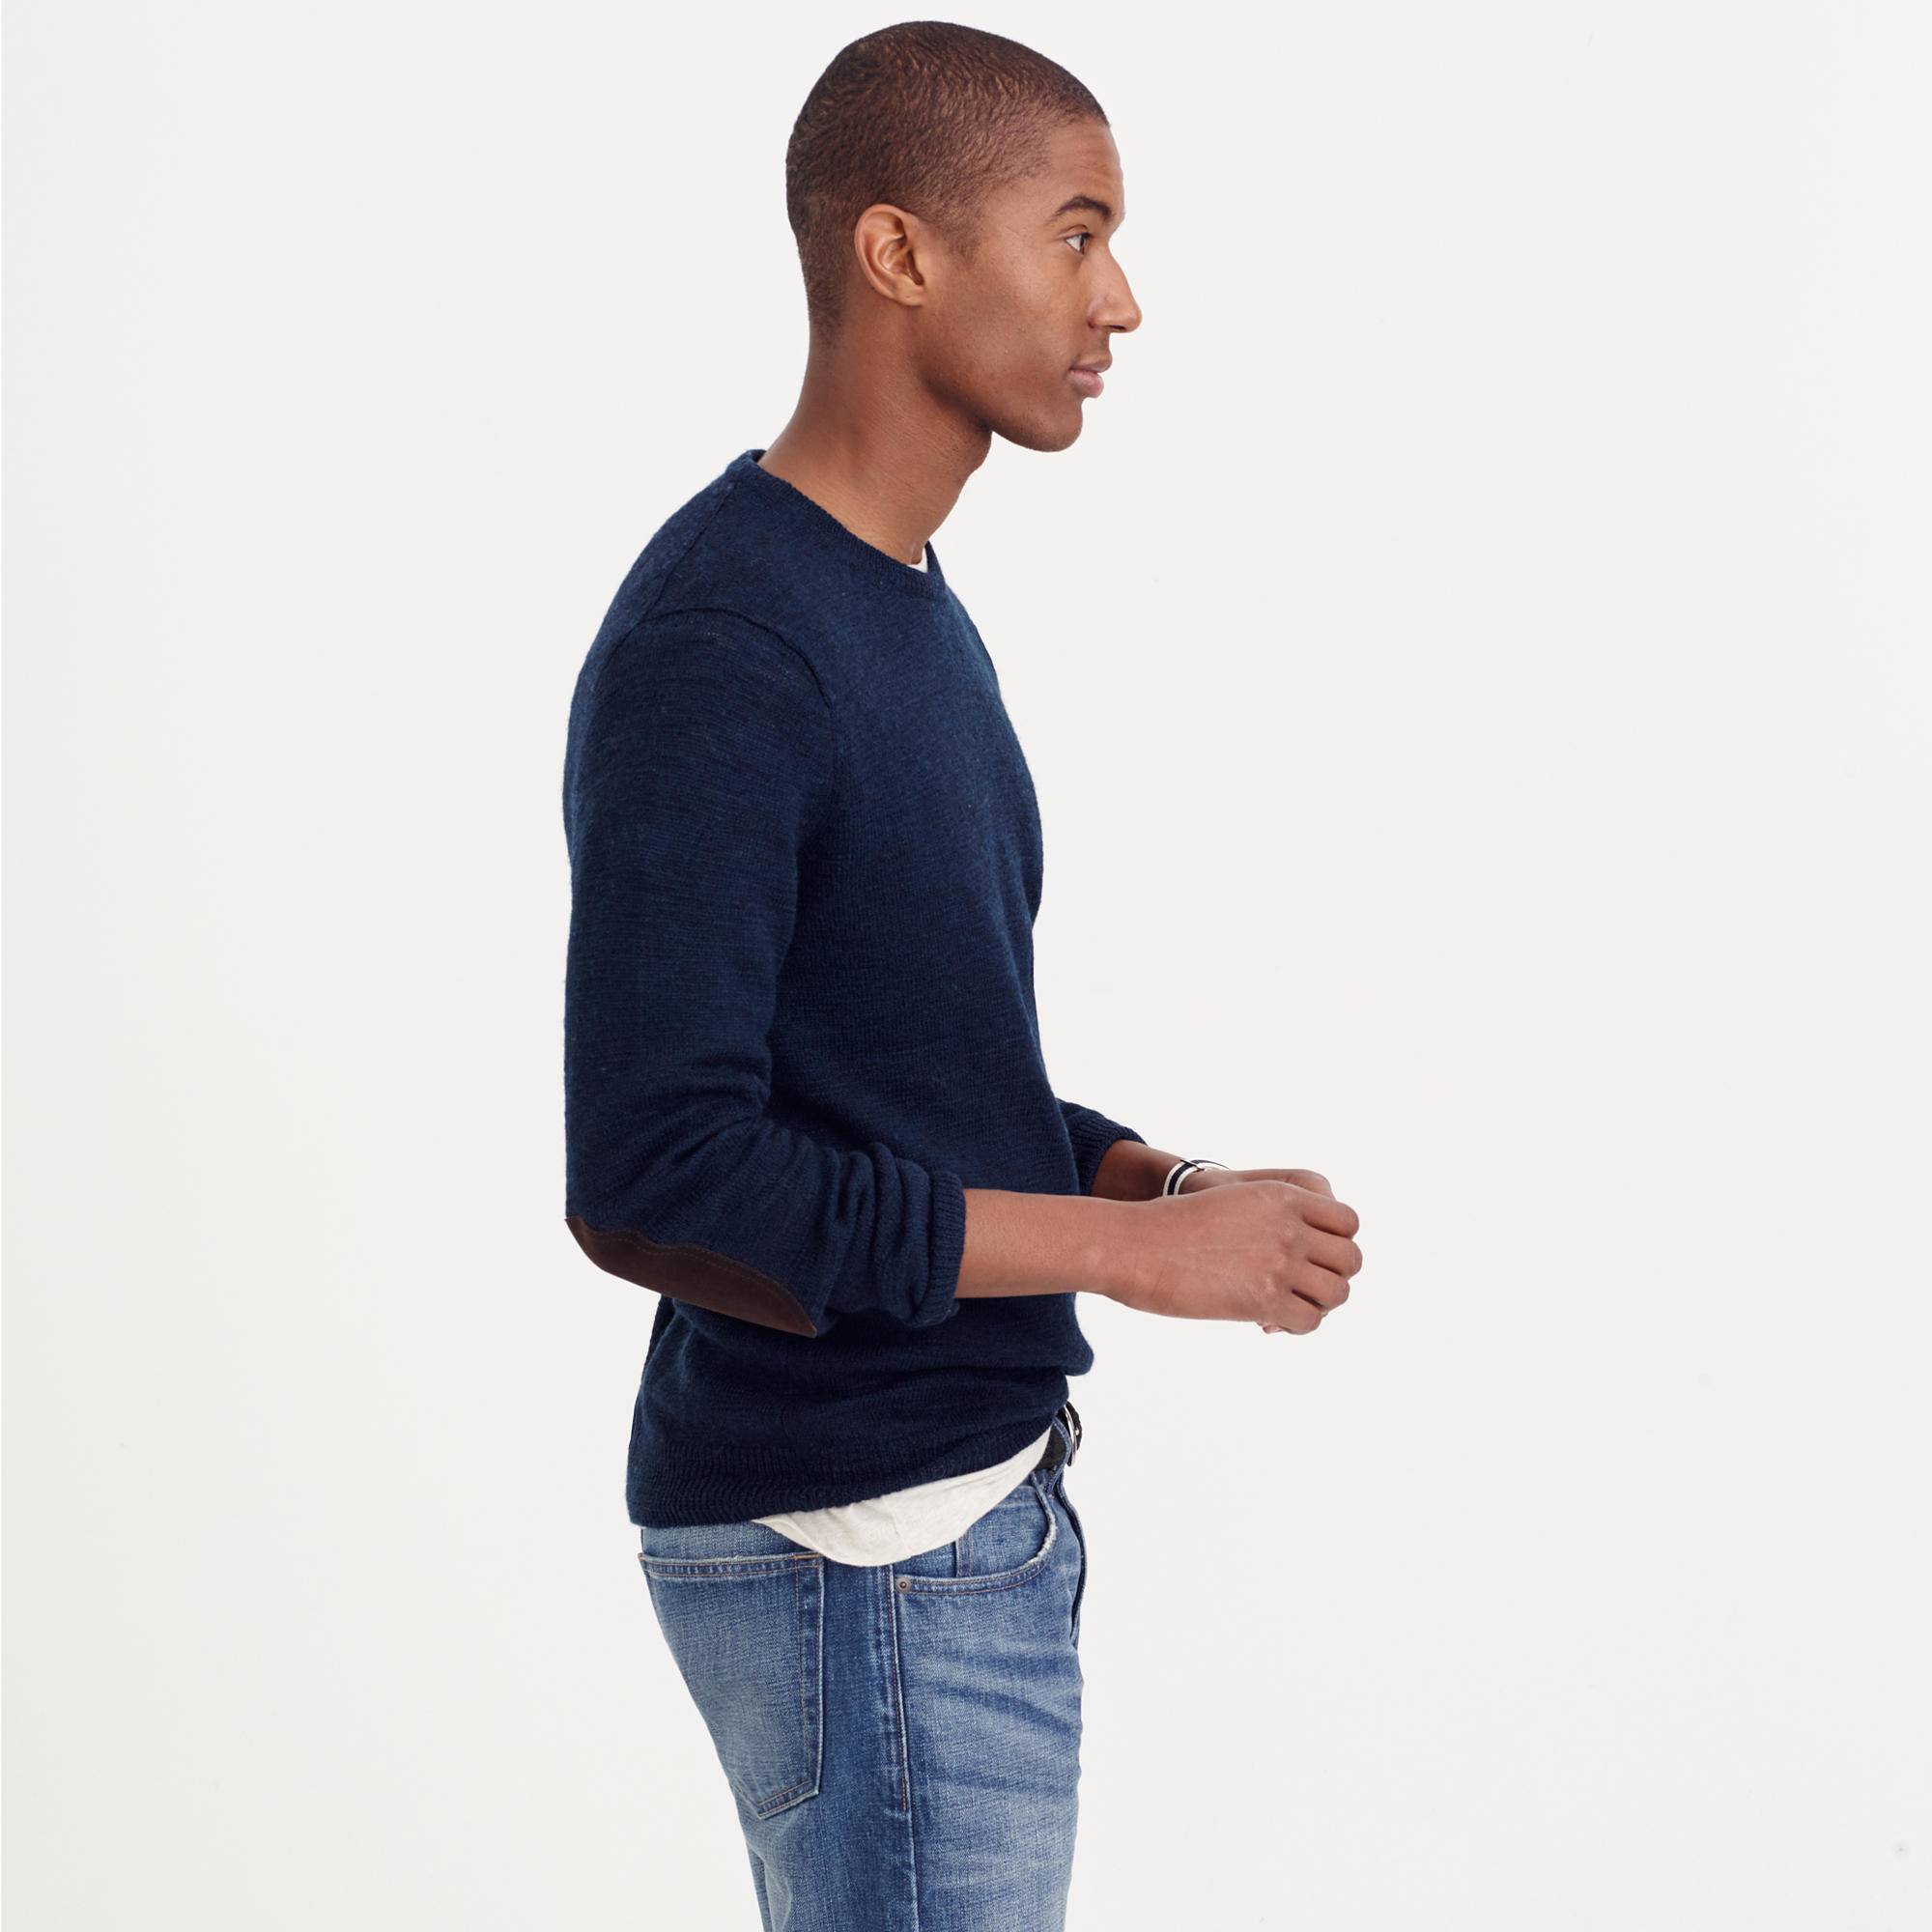 J.Crew Tall Rustic Merino V-neck Elbow-patch Sweater in Blue for Men